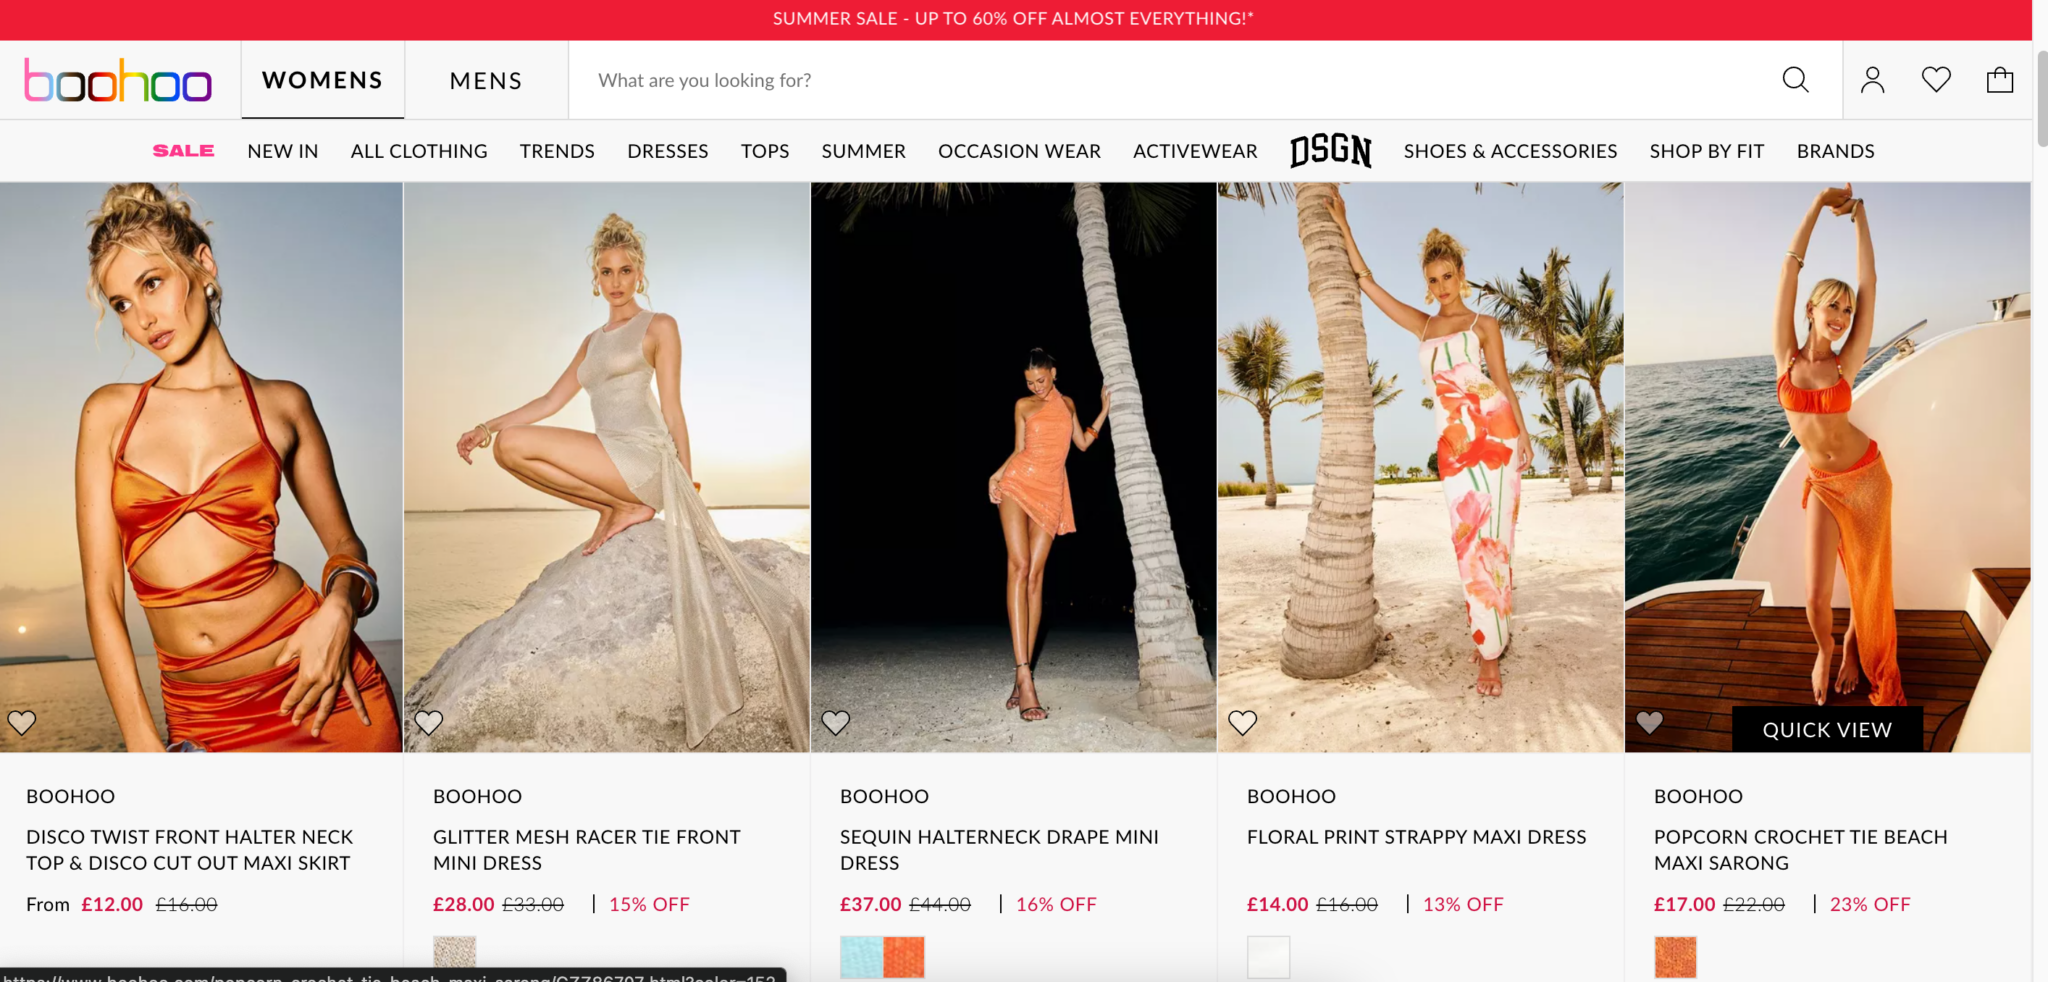 Are Shein and Boohoo Safe? 2